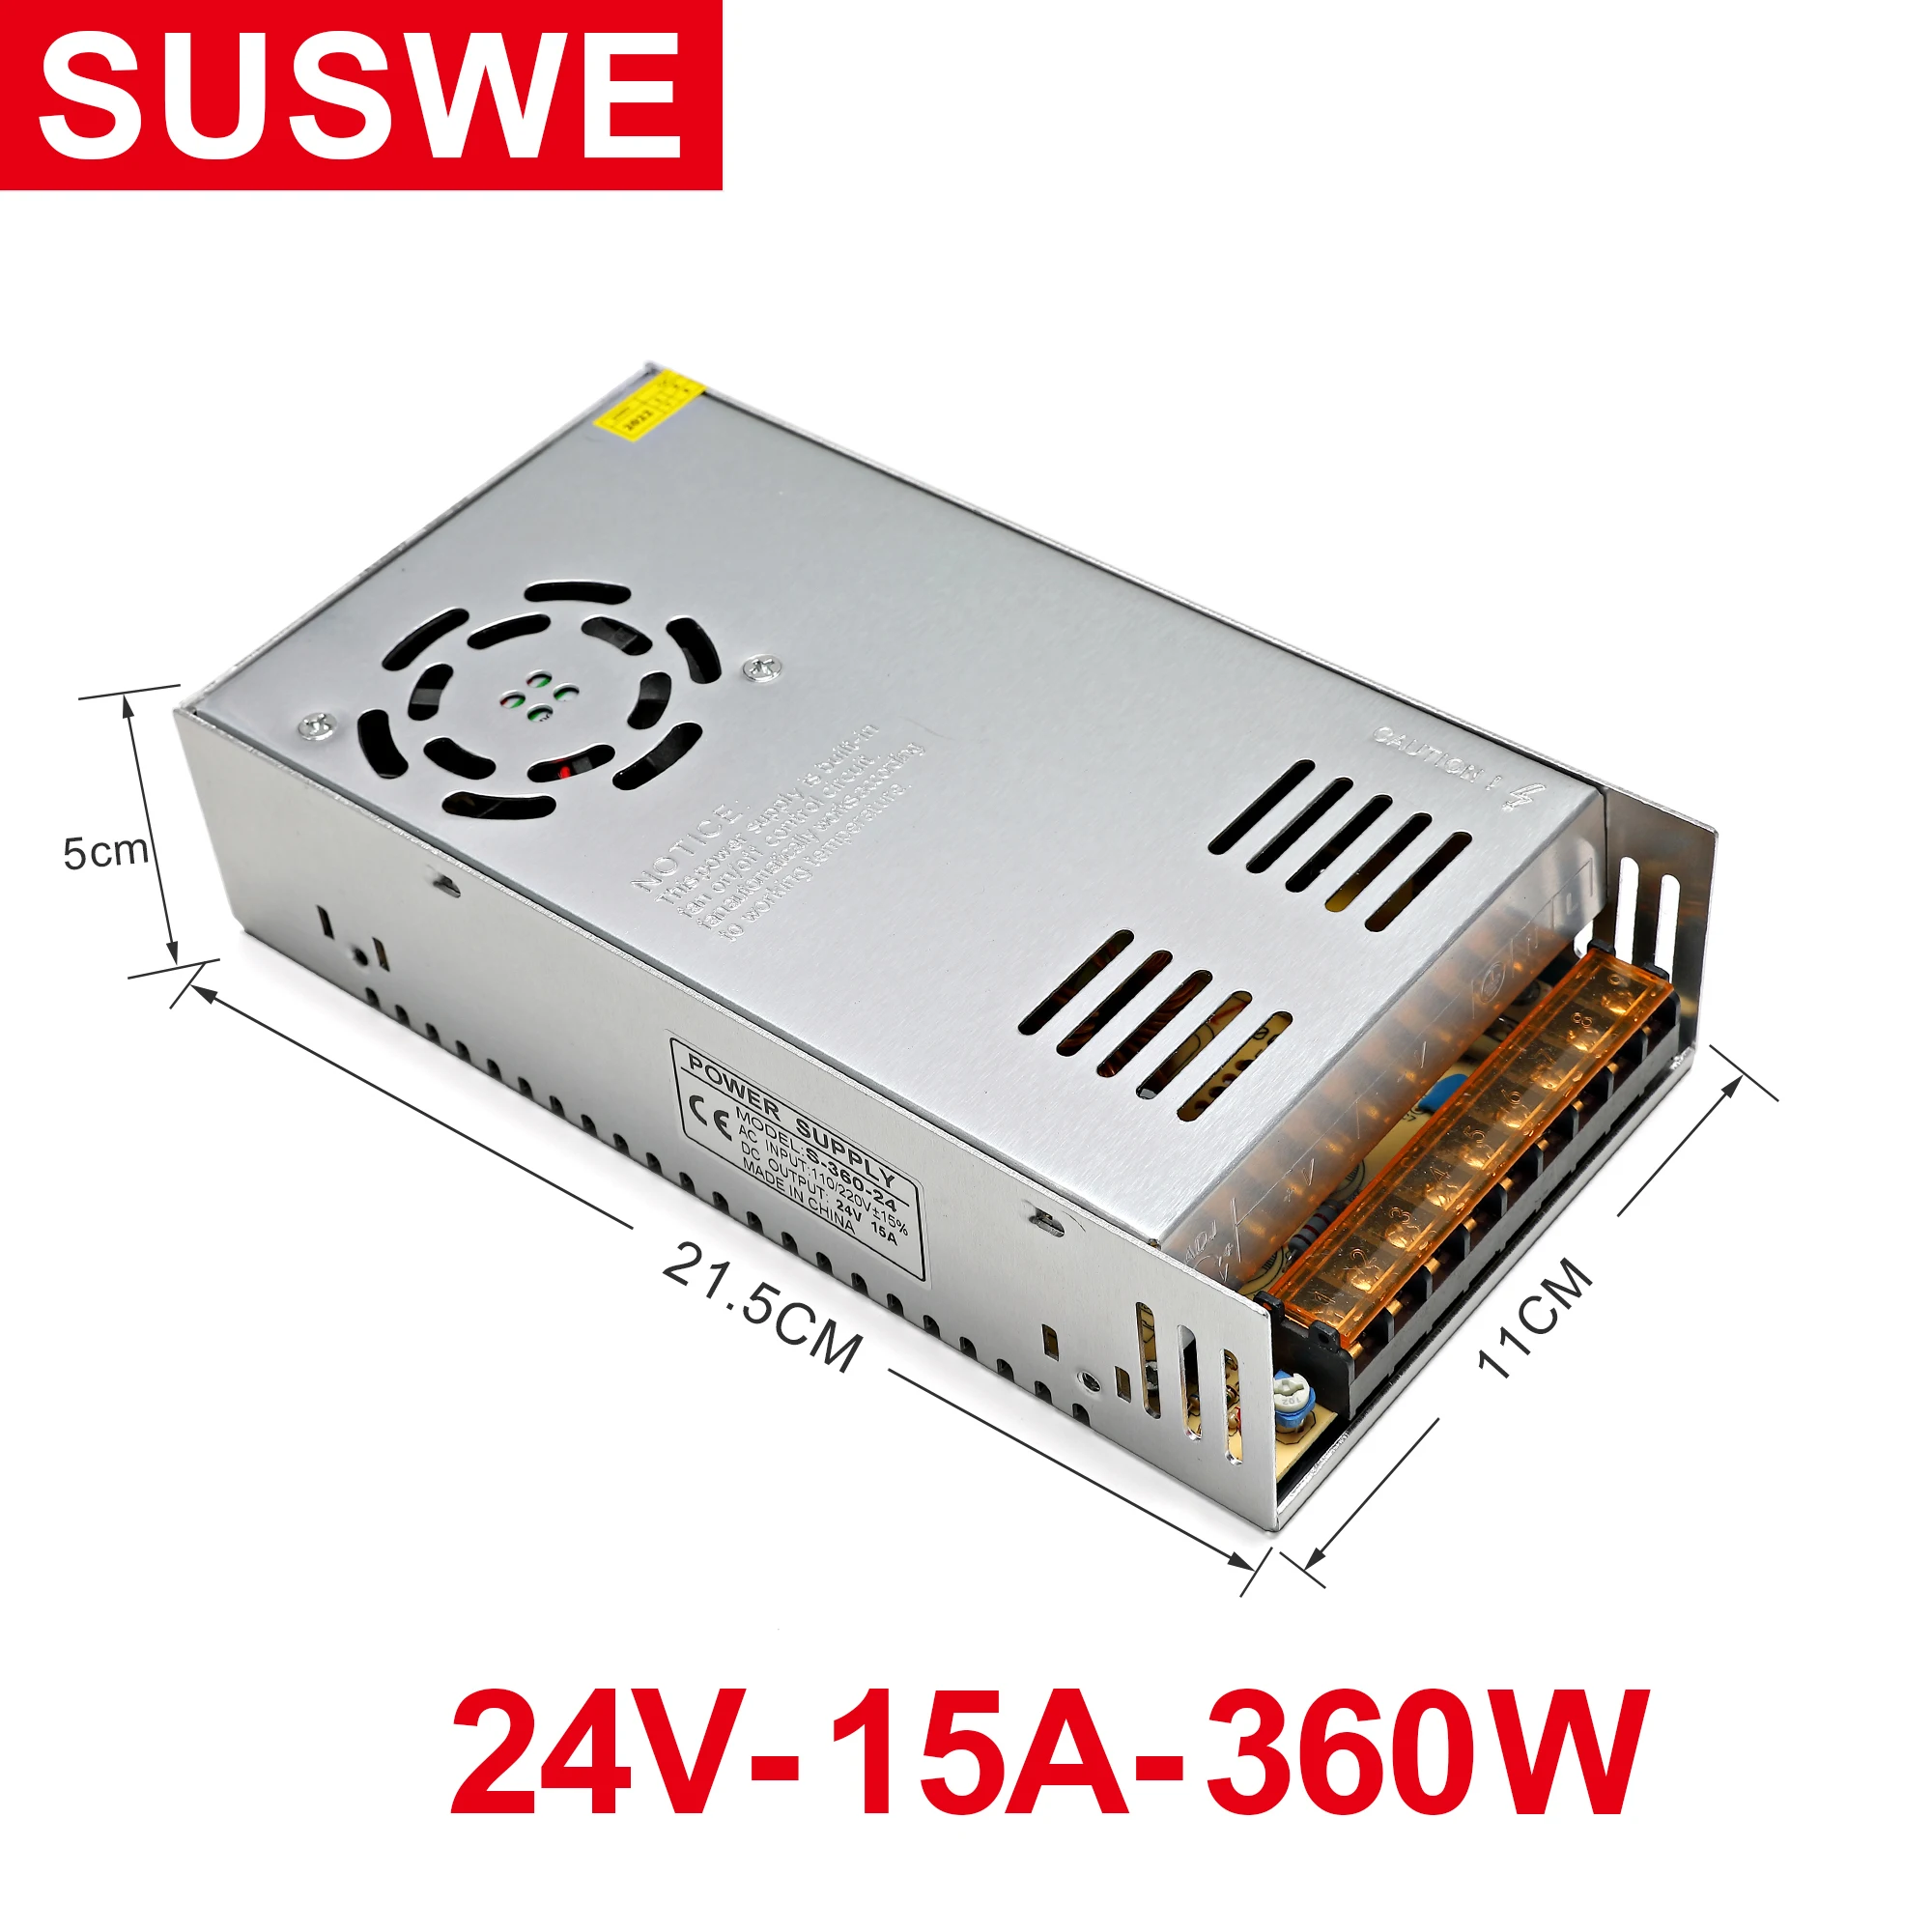 

24V Power 15A 350W Switching Power Adapter LED Monitoring Switching Power 3C Certification